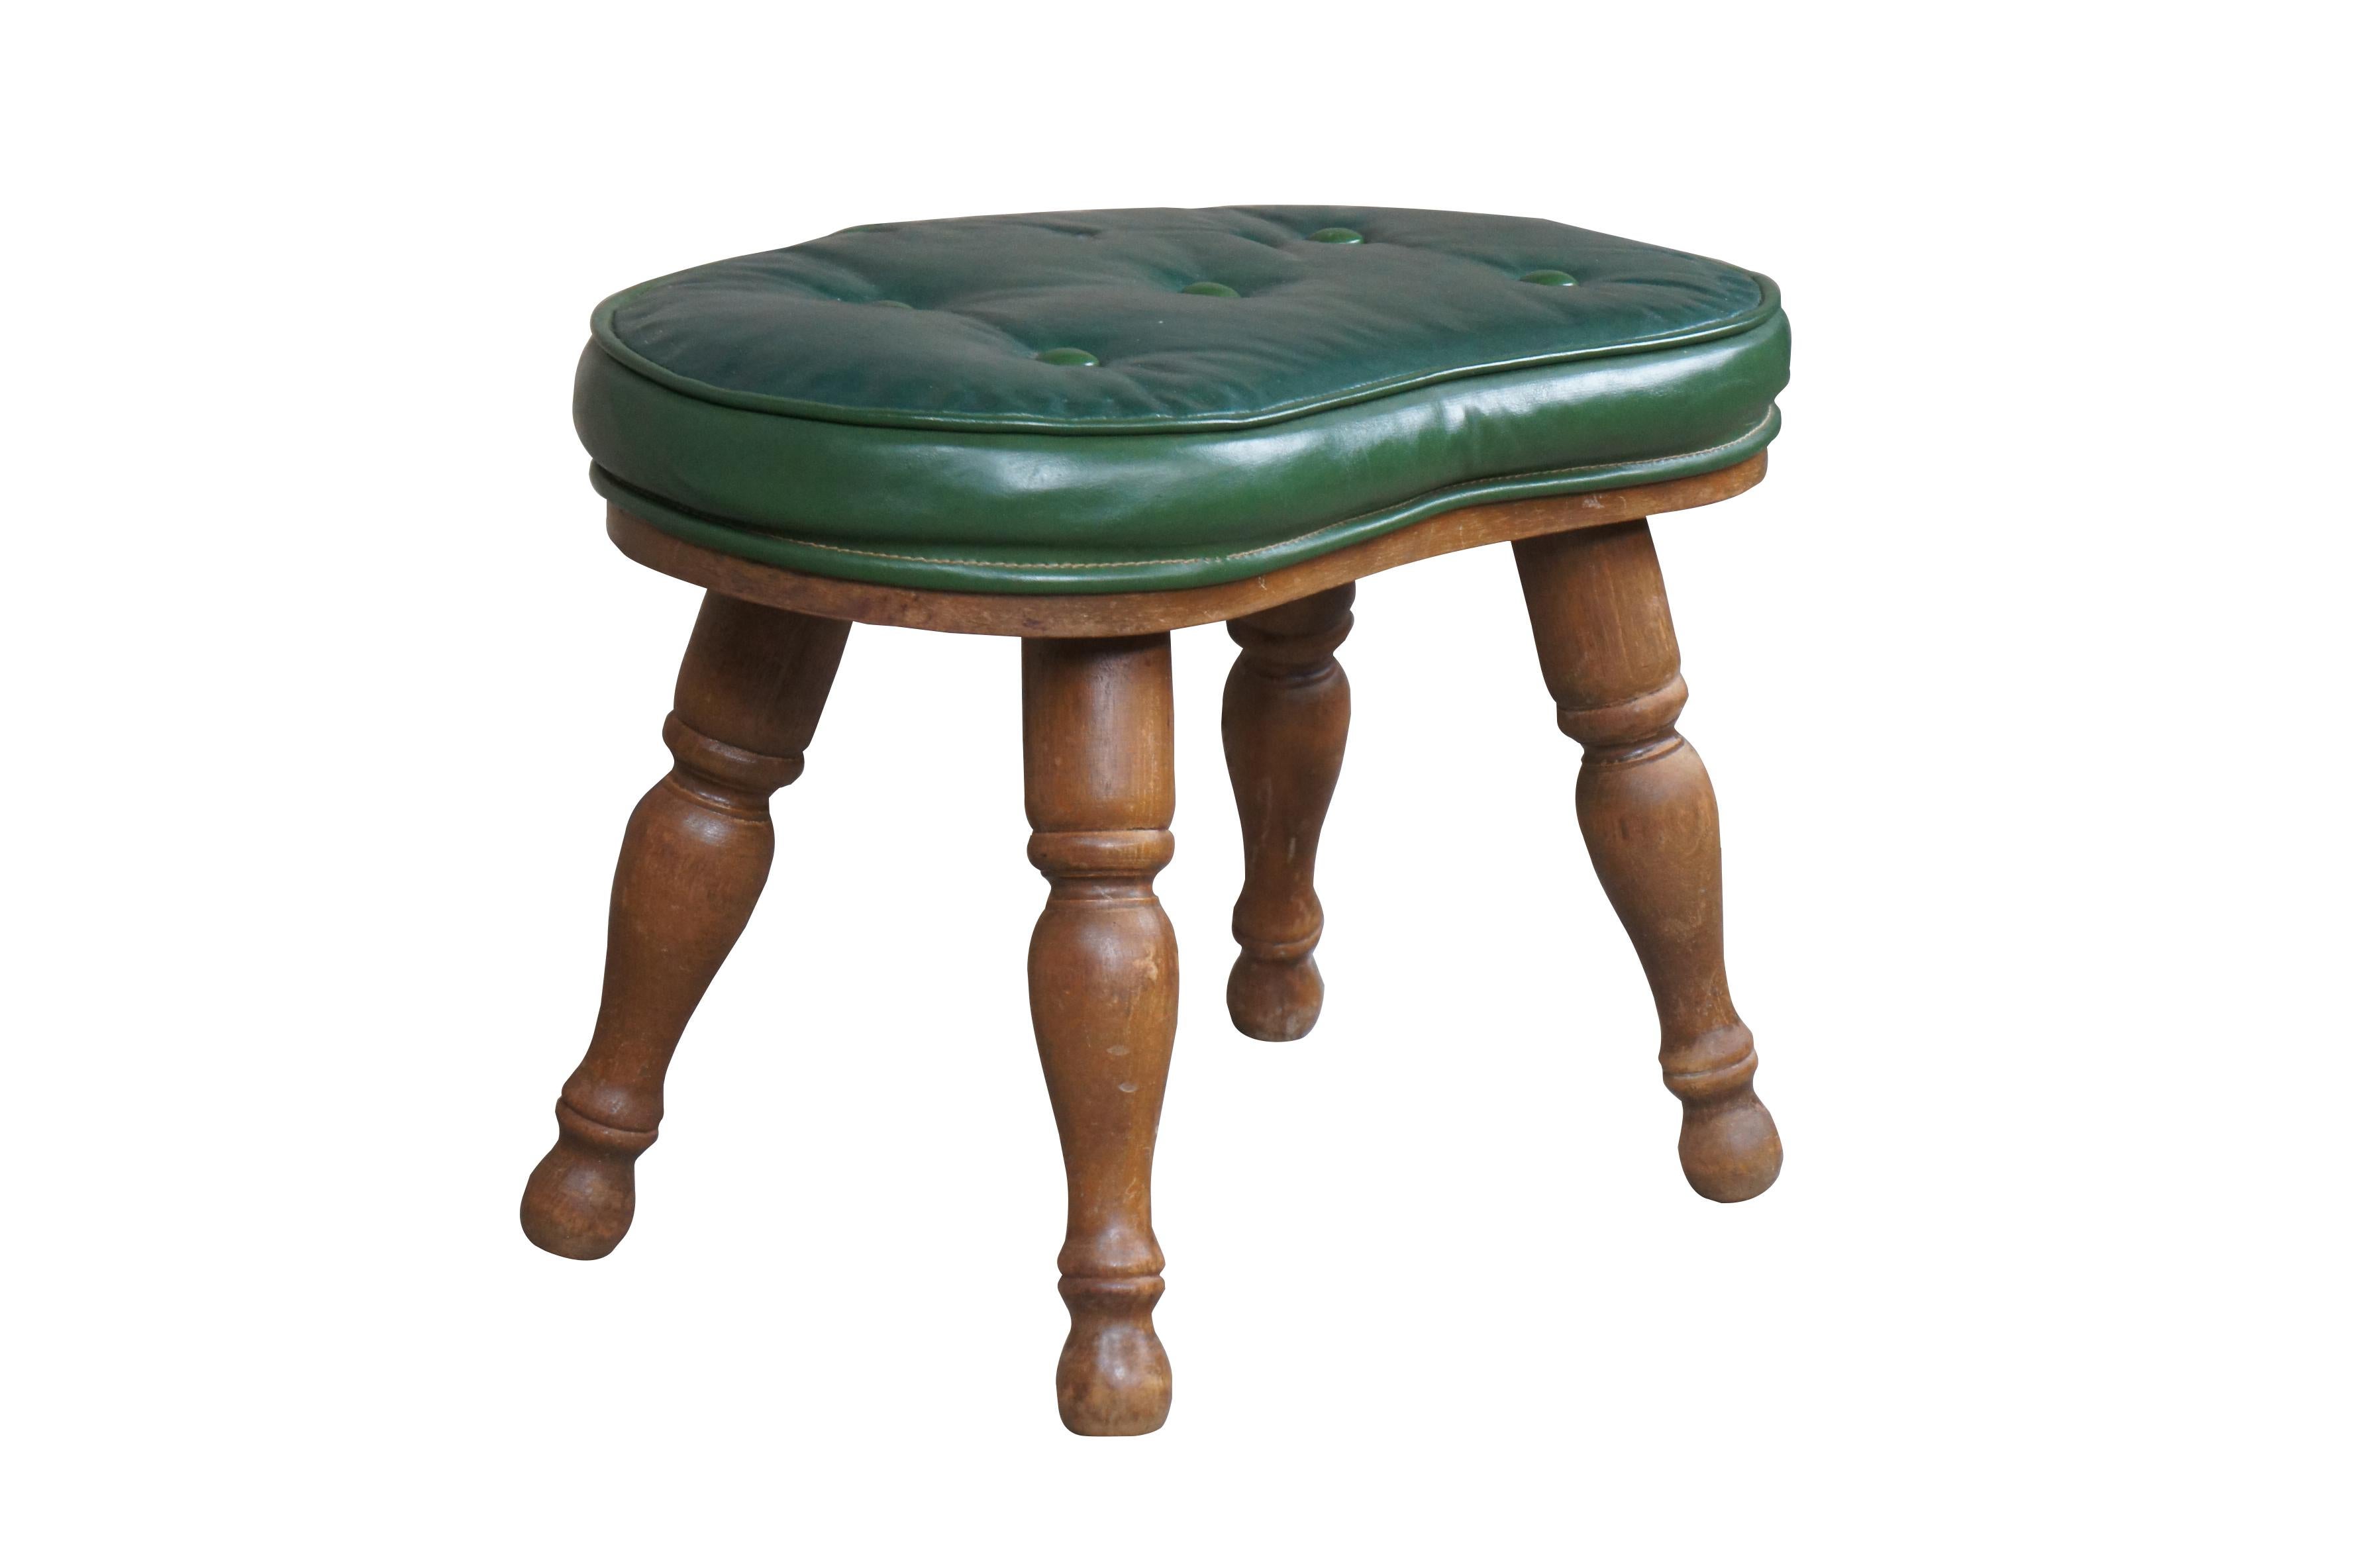 Midcentury Kidney Bean Foot Stool, Bench seat or Ottoman. Features a hardwood frame with turned legs and a green vinyl tufted seat. A retro design that will draw attention in any space.